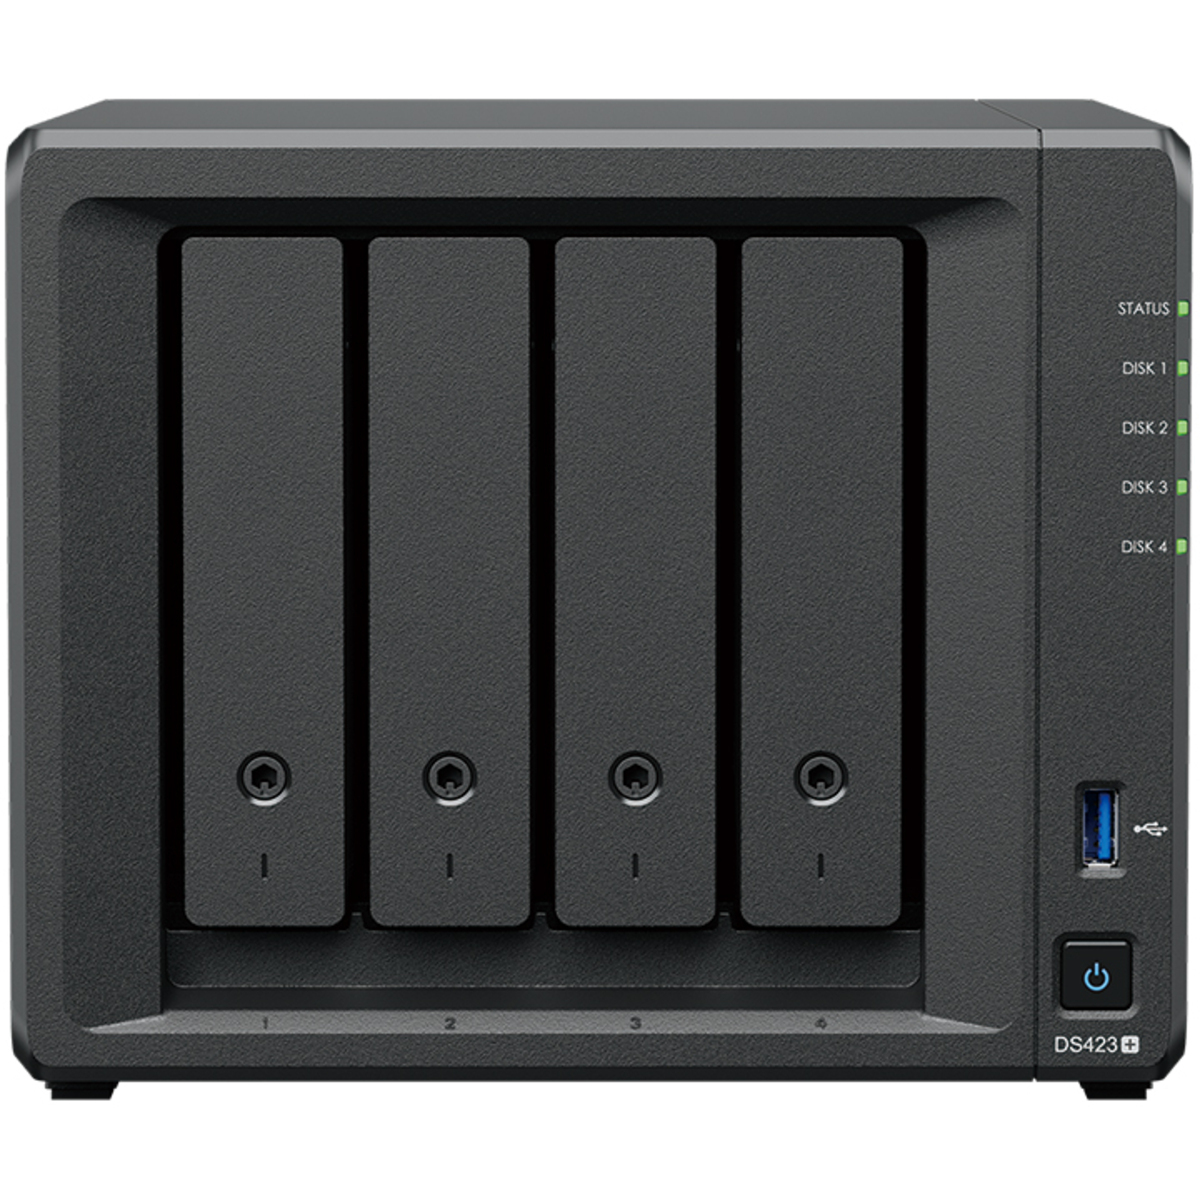 Synology DiskStation DS423+ 16tb 4-Bay Desktop Multimedia / Power User / Business NAS - Network Attached Storage Device 2x8tb Synology HAT5310 Series HAT5310-8T 3.5 7200rpm SATA 6Gb/s HDD ENTERPRISE Class Drives Installed - Burn-In Tested - FREE RAM UPGRADE DiskStation DS423+